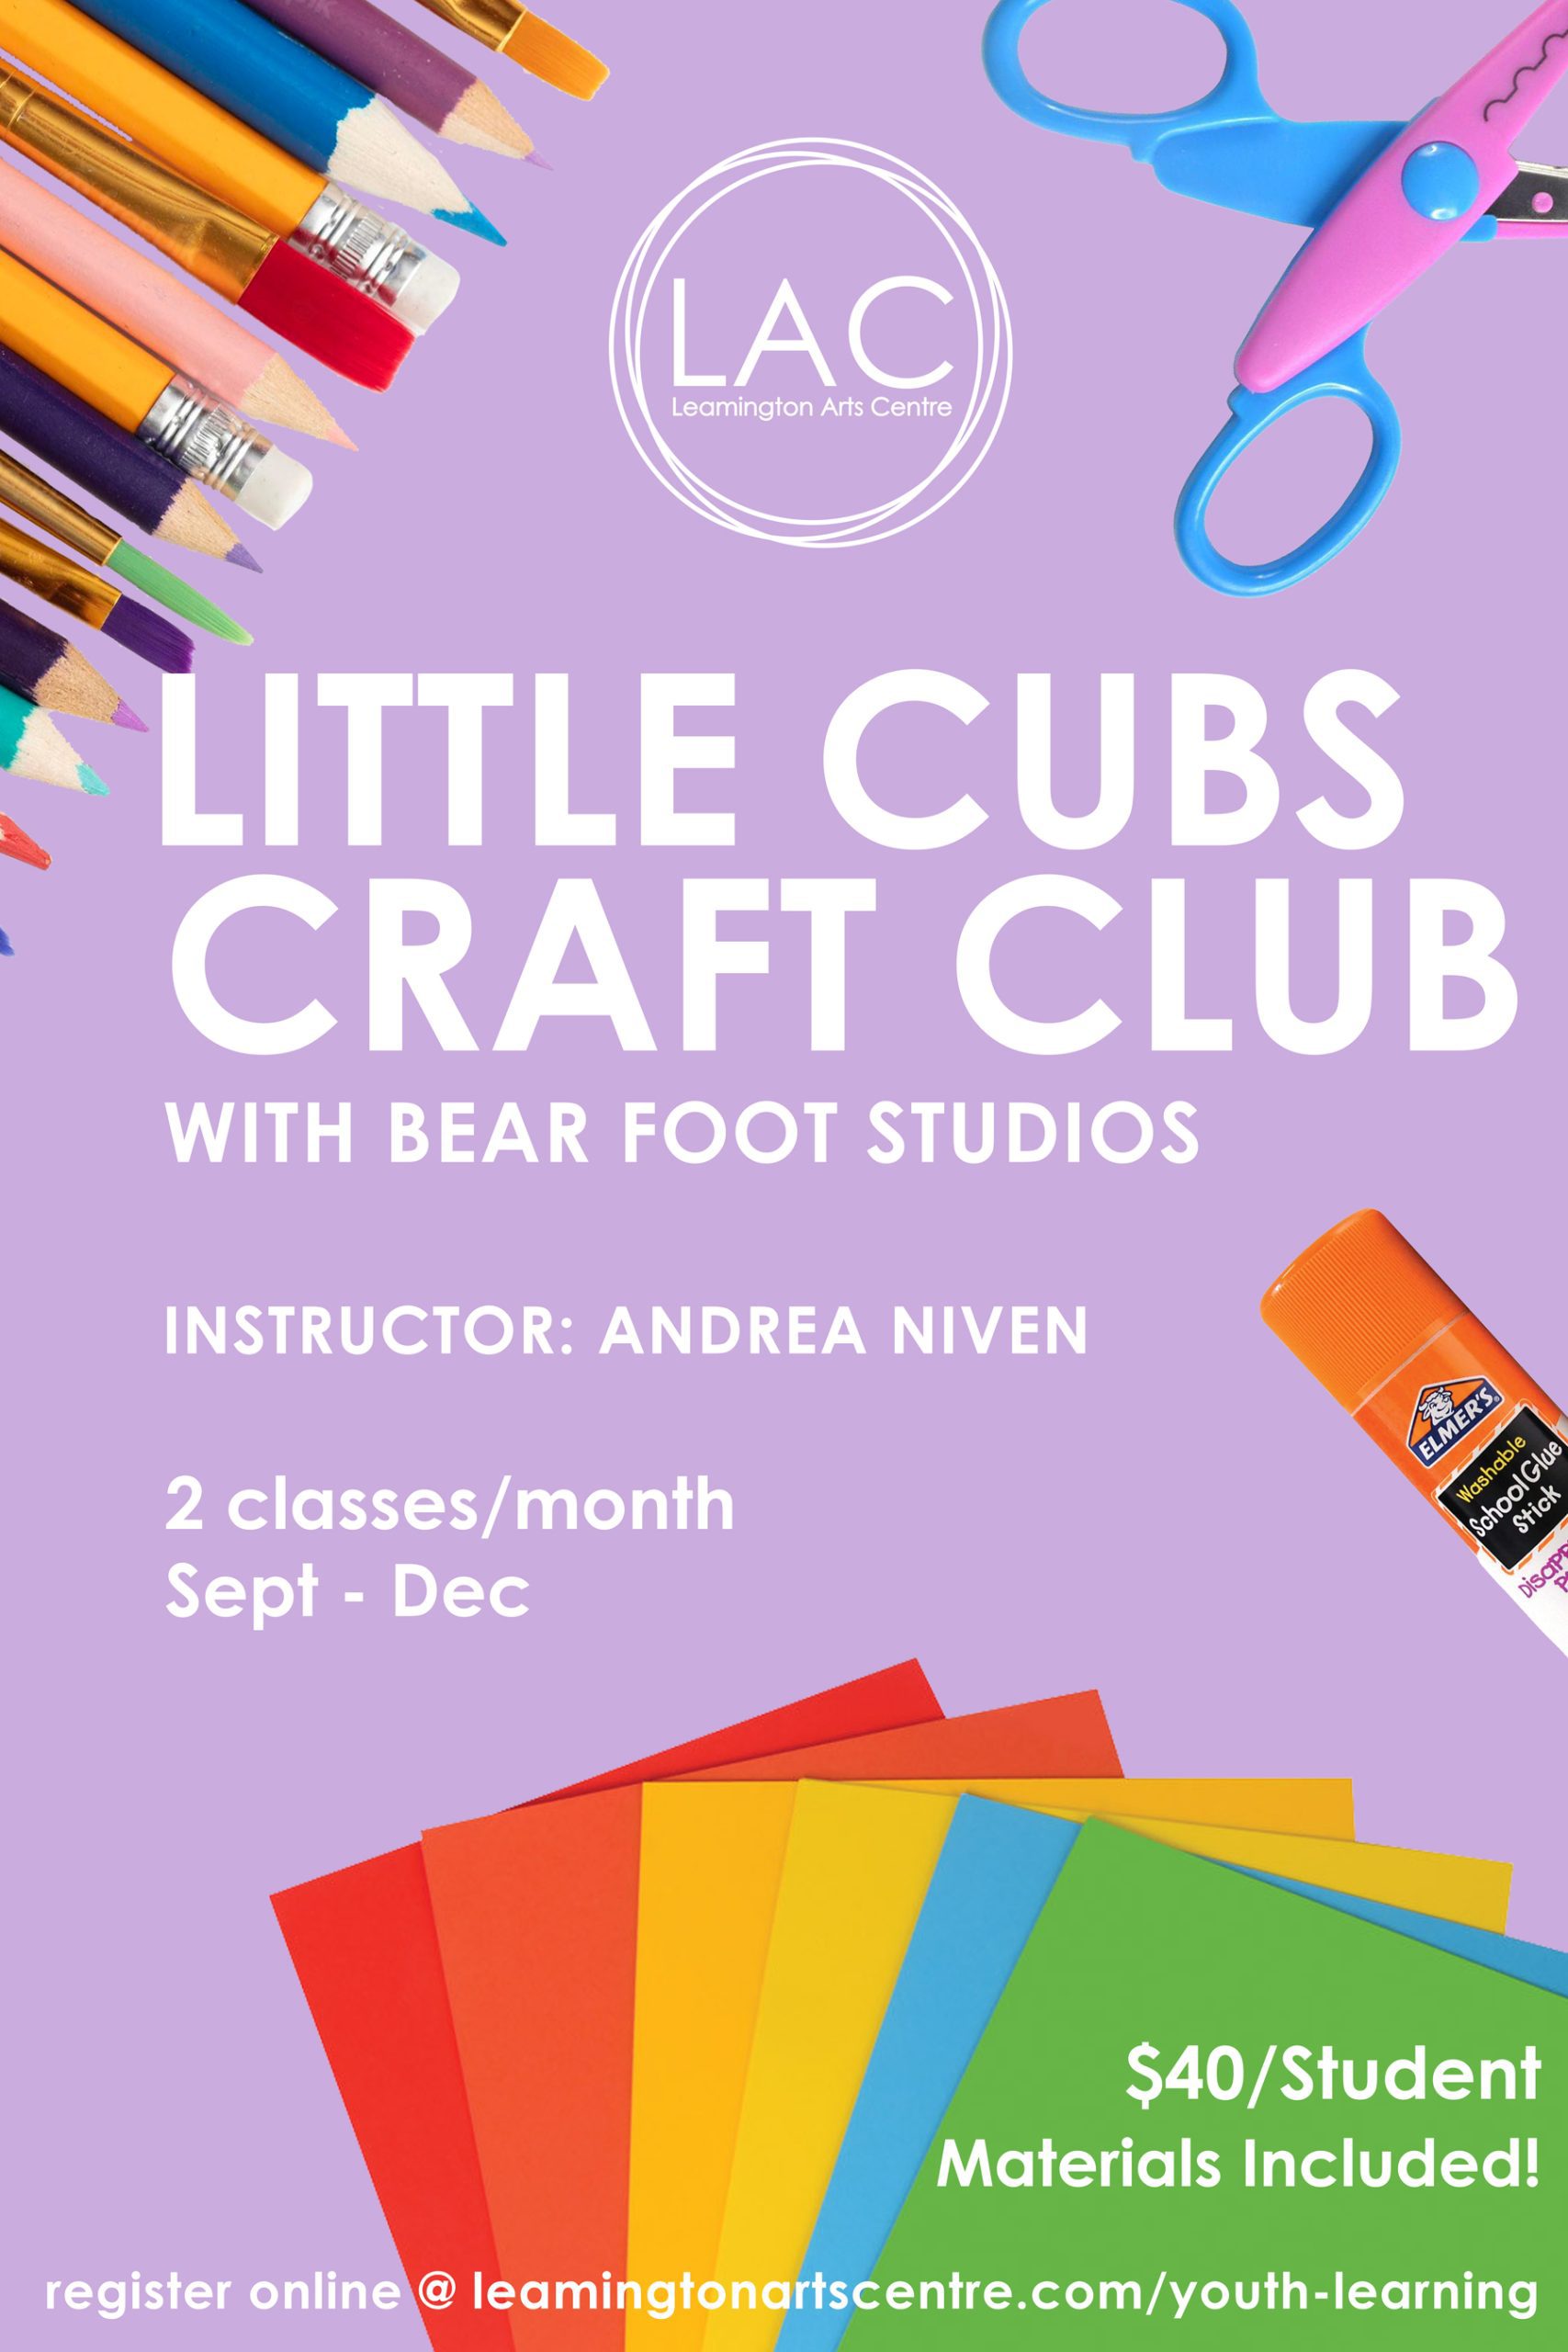 Little Cubs Craft Club: Youth Learning